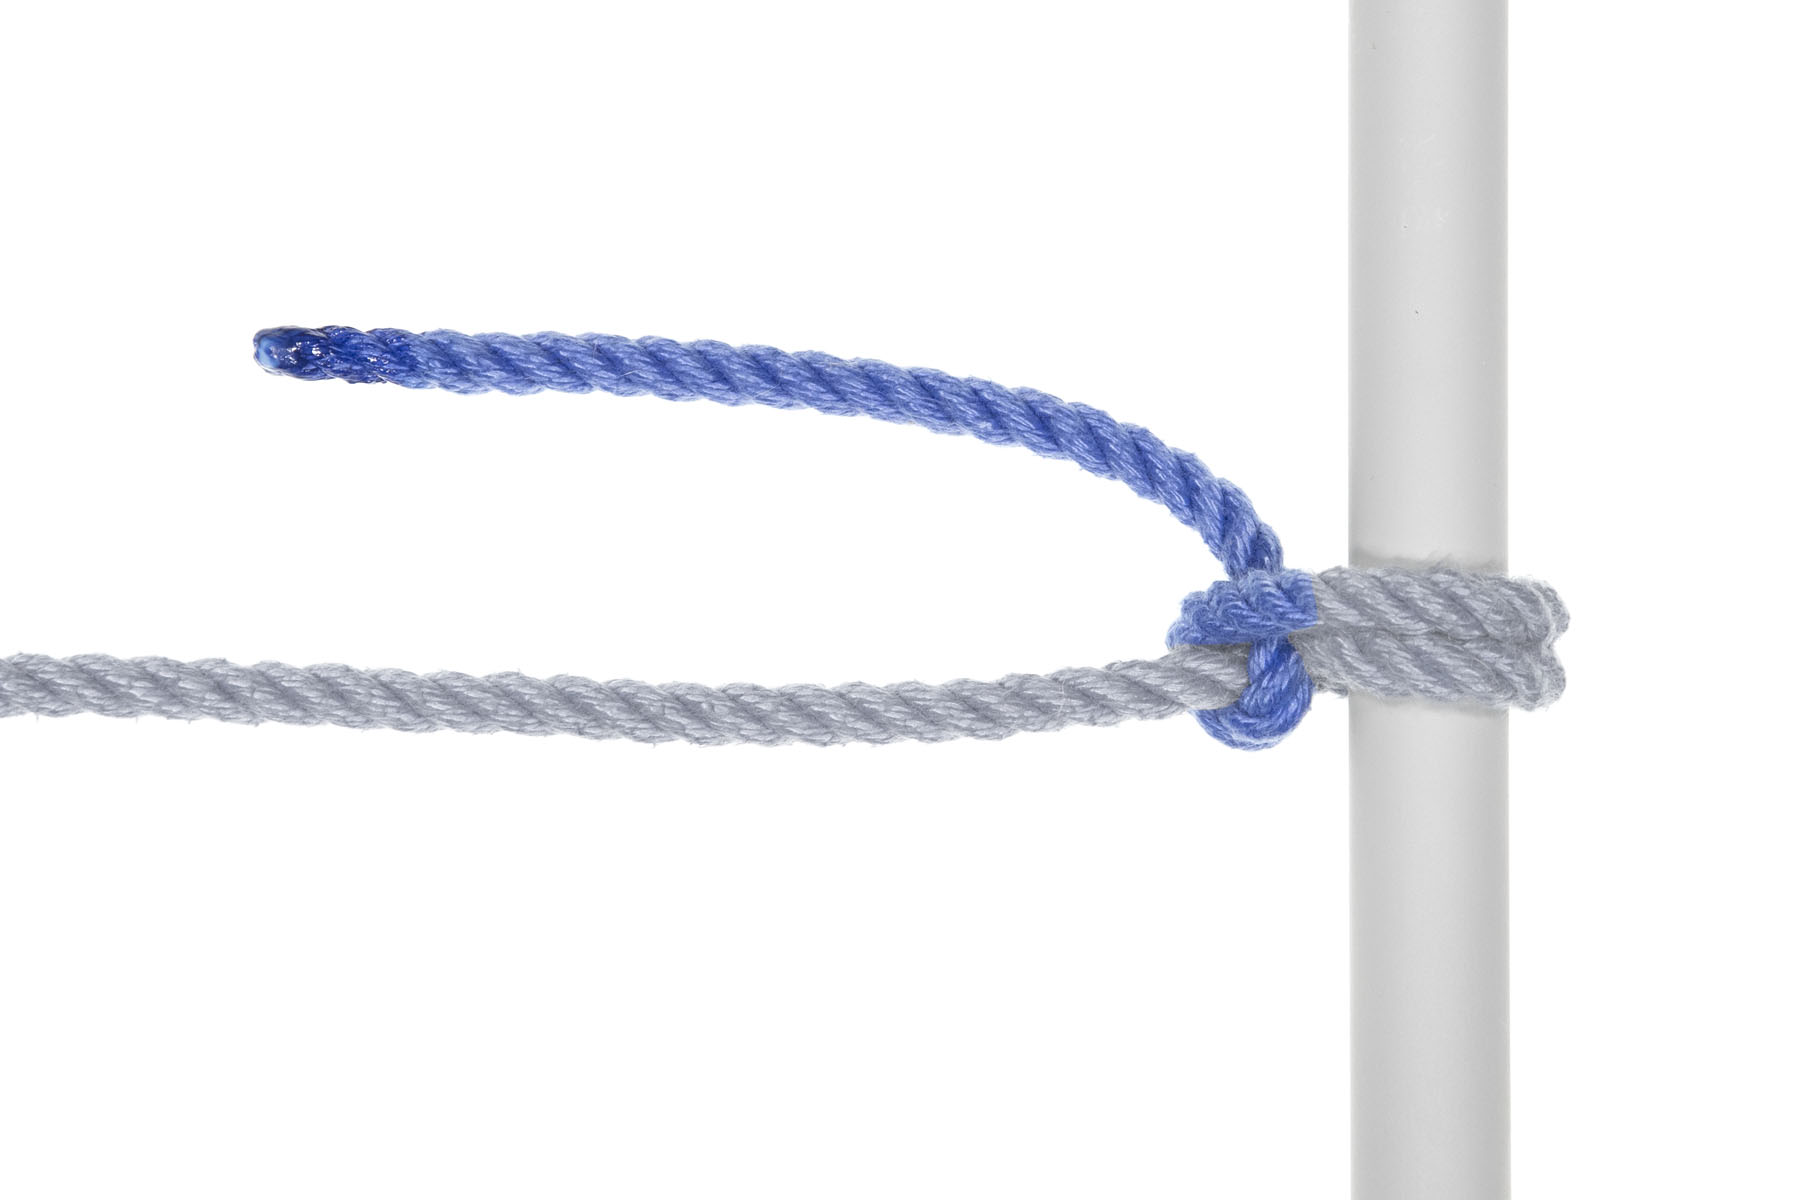 The half hitch has been snugged into place. The rope enters the frame from the left, makes two tight wraps around the pole, and finishes with a tidy half hitch.